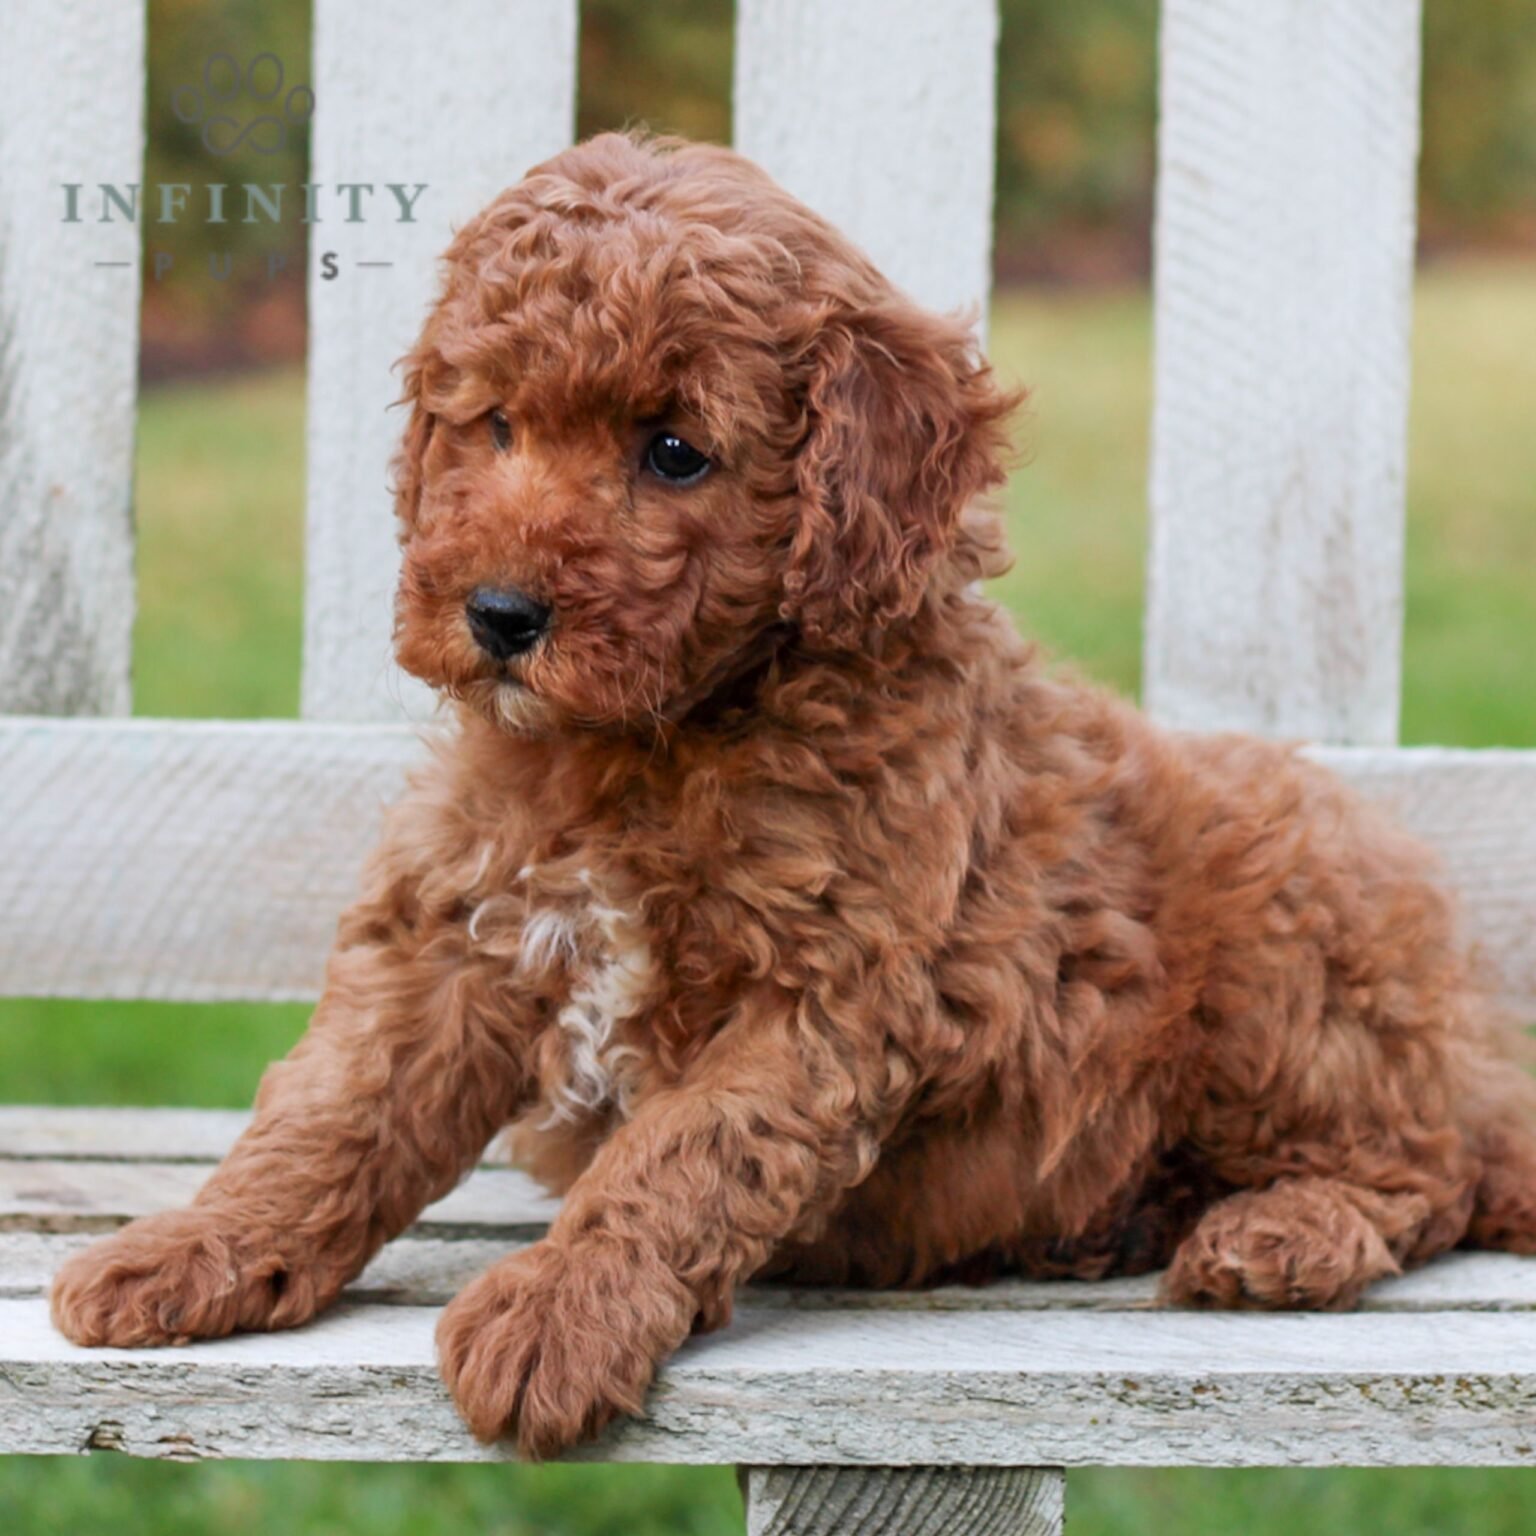 Star - Mini Goldendoodle puppy on bench